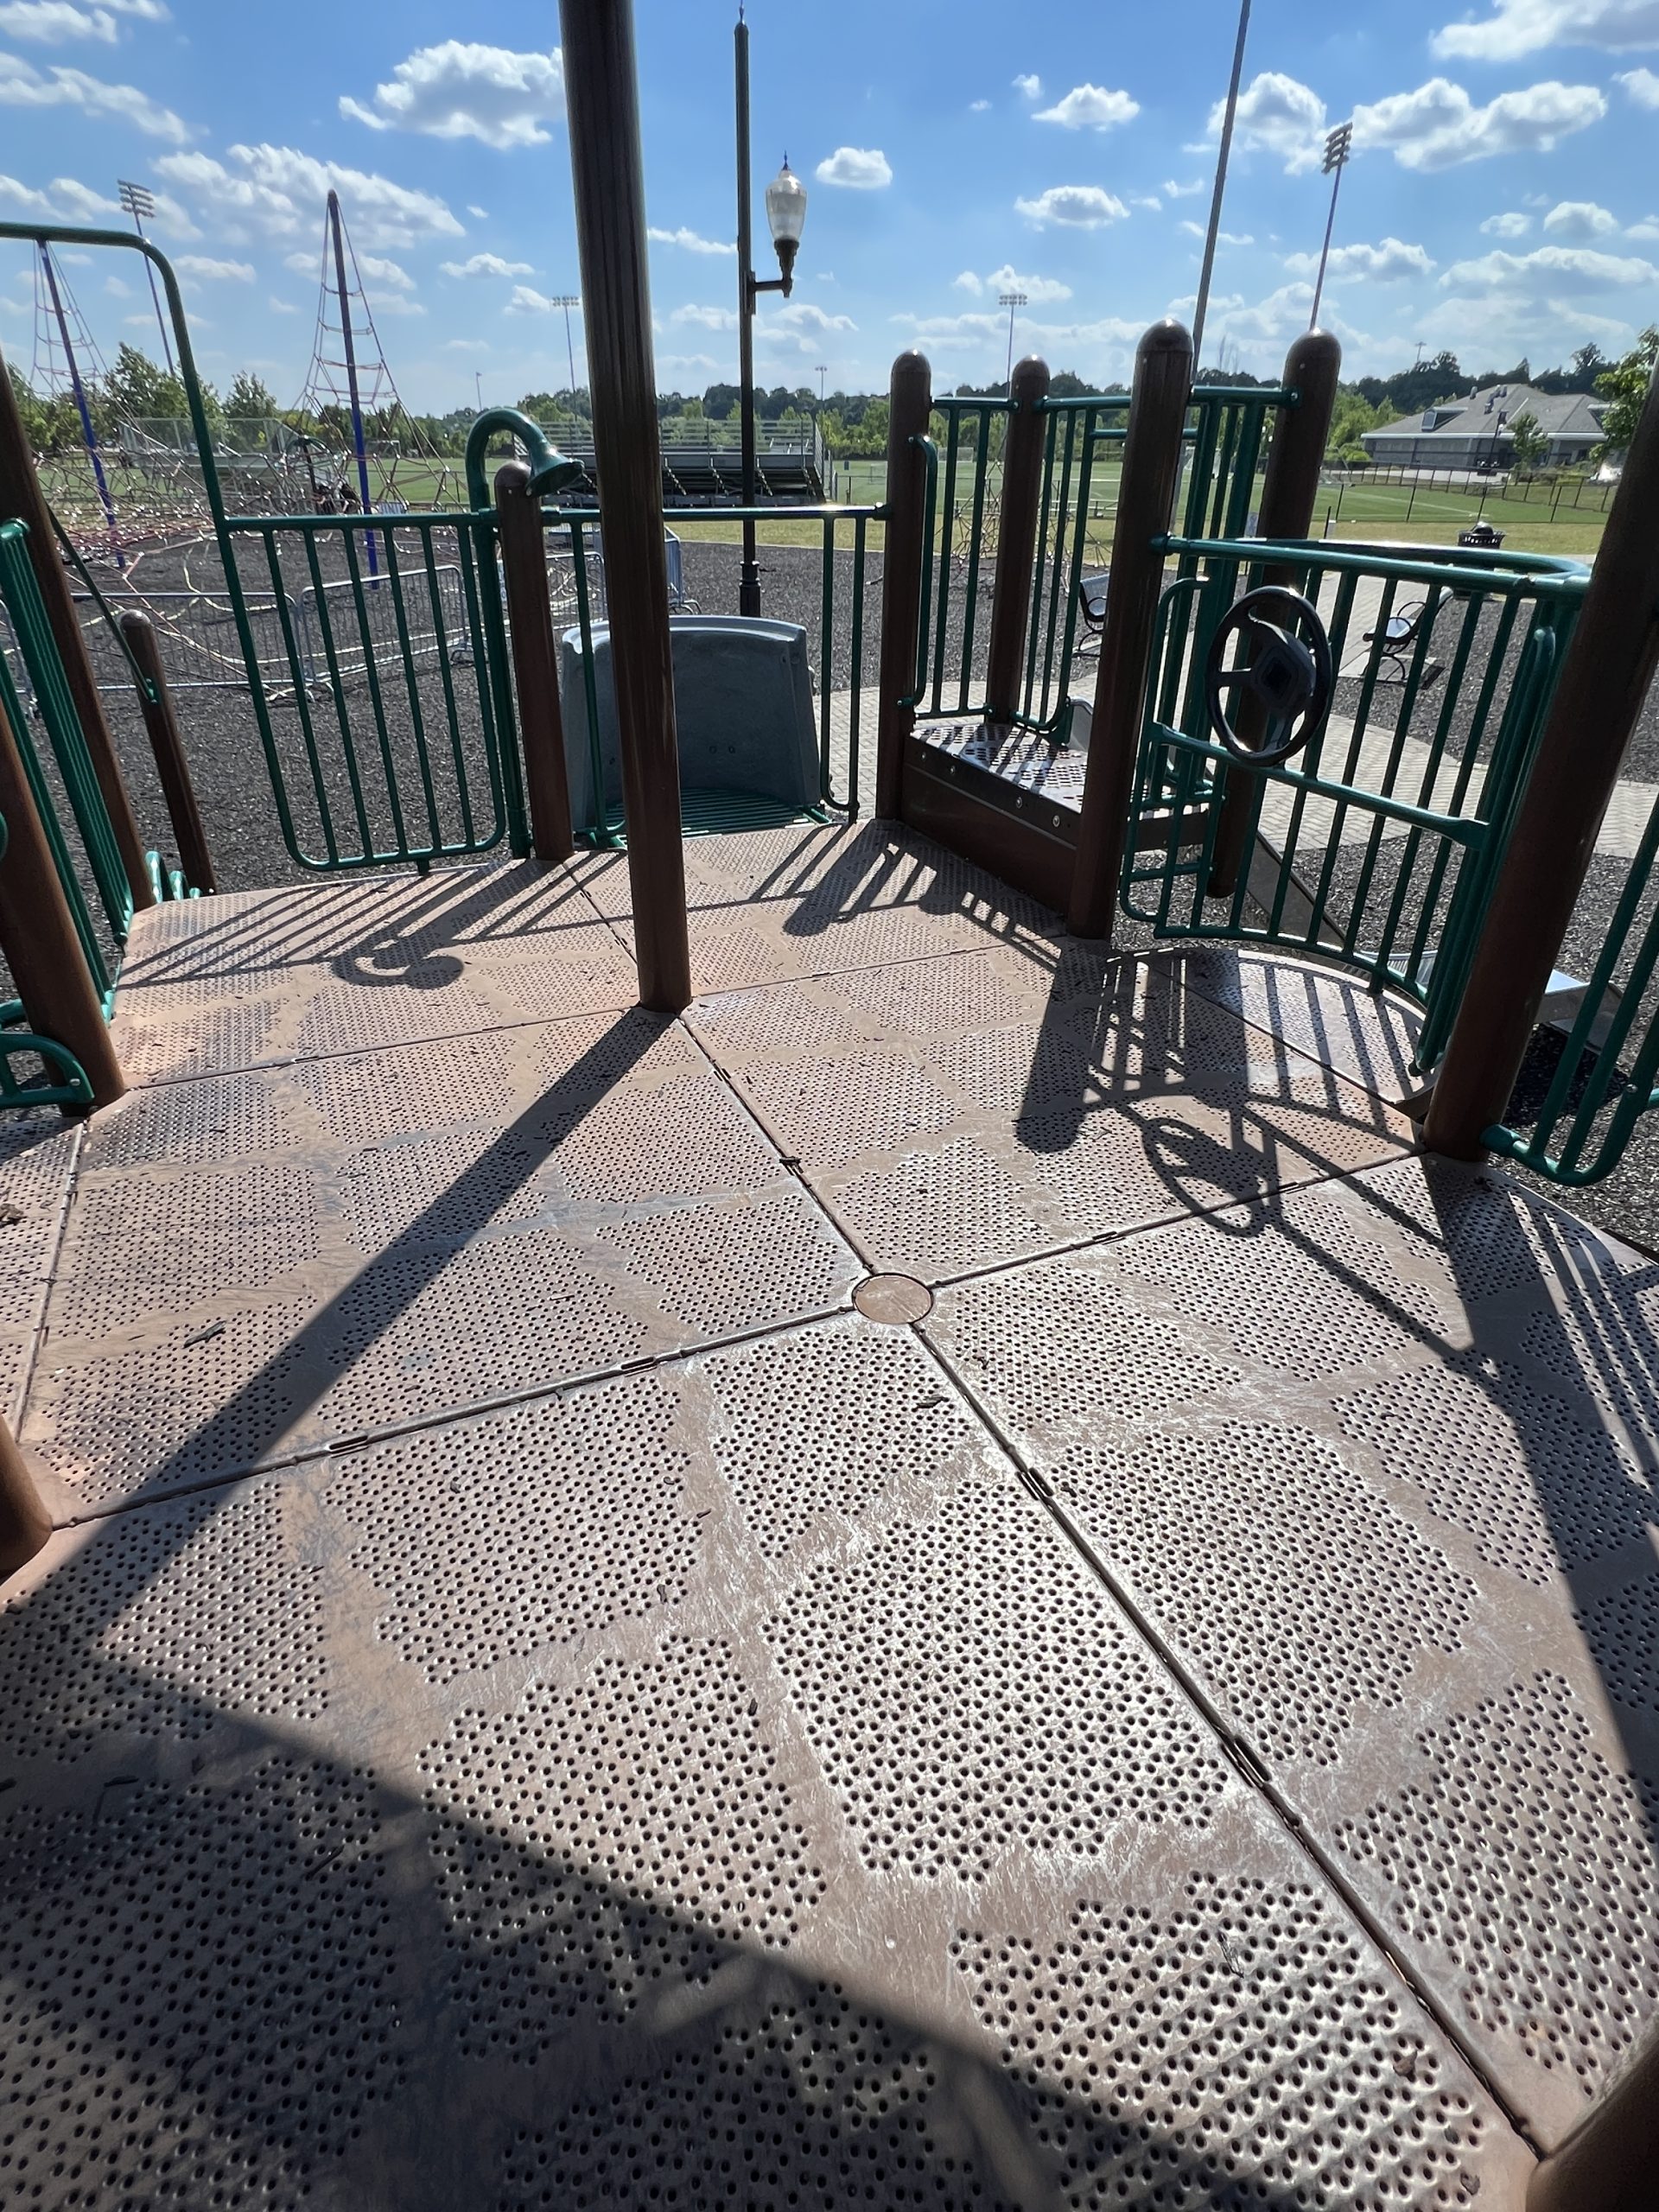 ACCESSIBLE - Wide platform 1 TALL at Overpeck County Park Playground in Leonia NJ